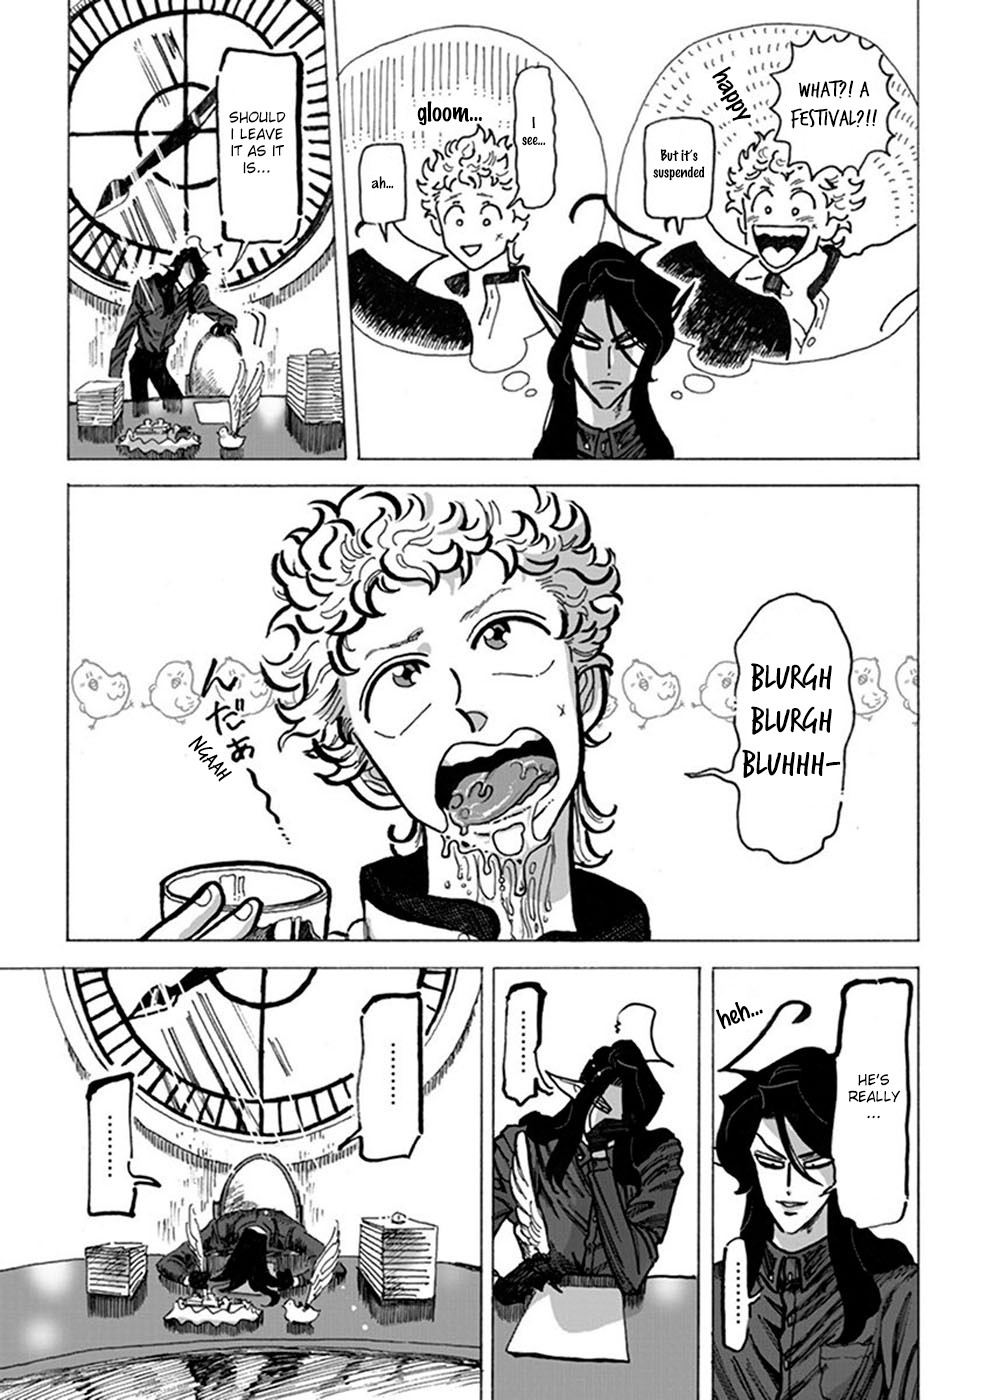 Hero In The Satan's House Vol. 1 Ch. 3 The Hero has become friends with the Demon King...!